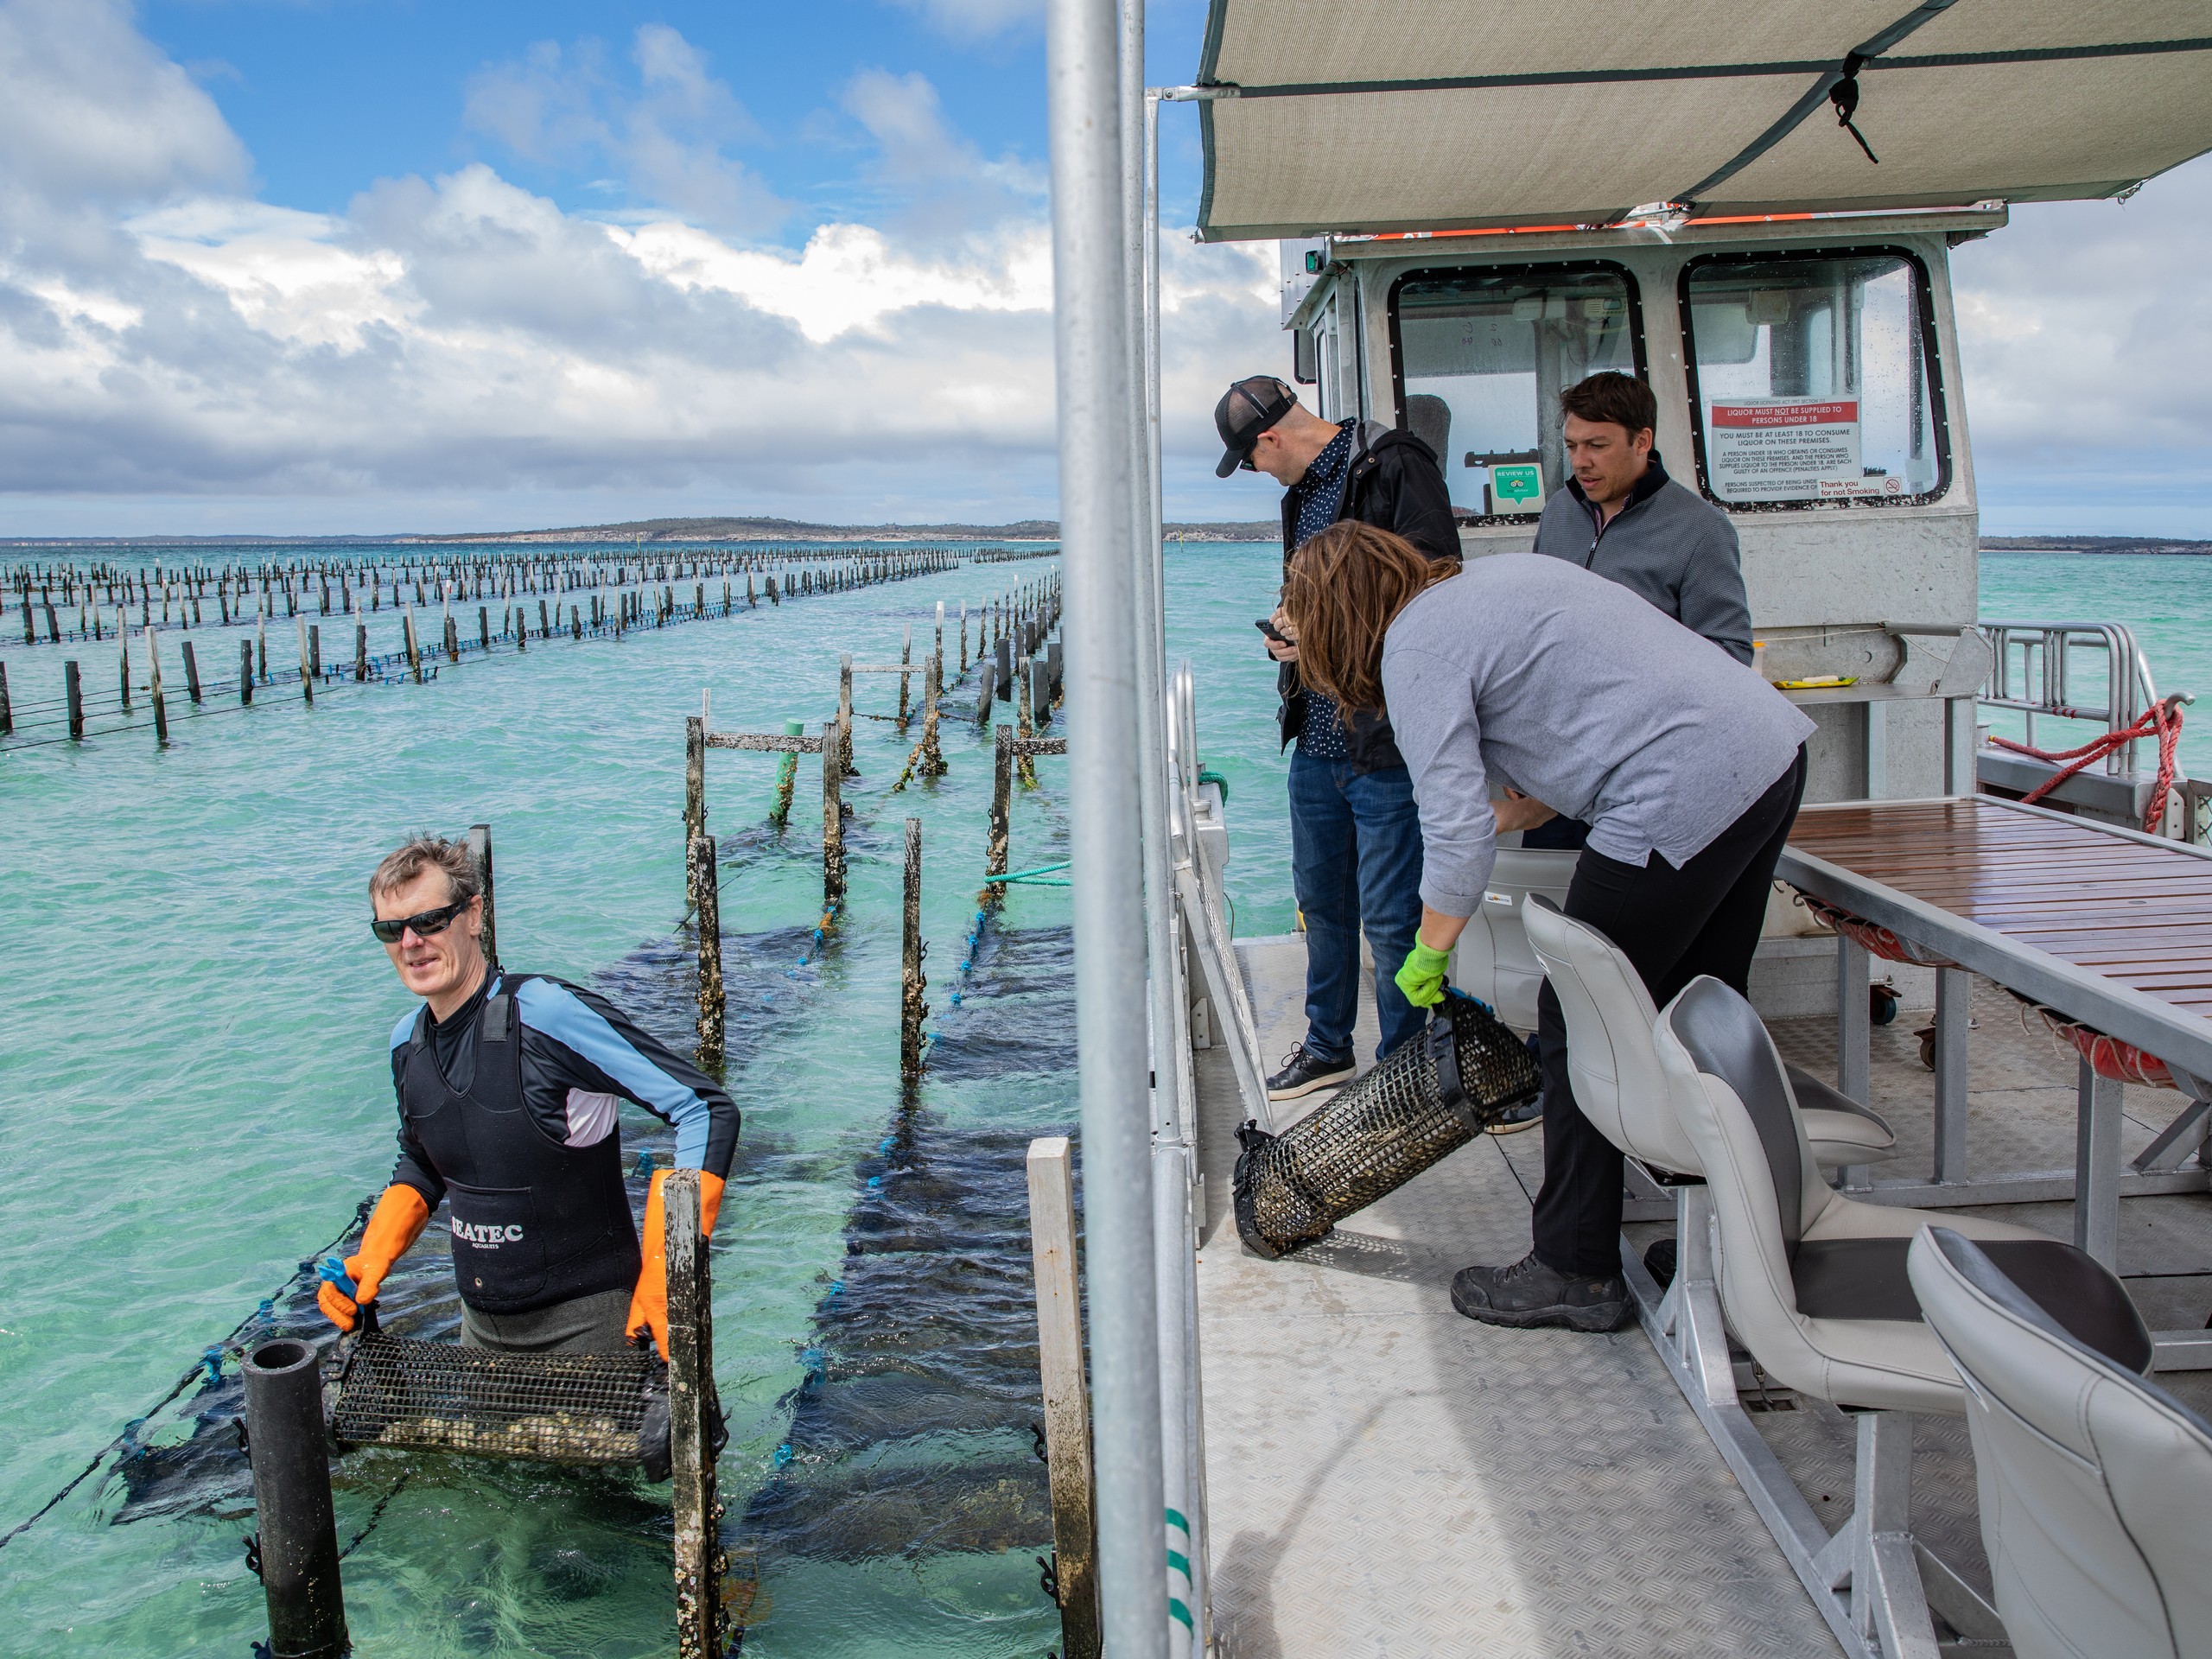 Watching how oysters are being harvested at South Australia